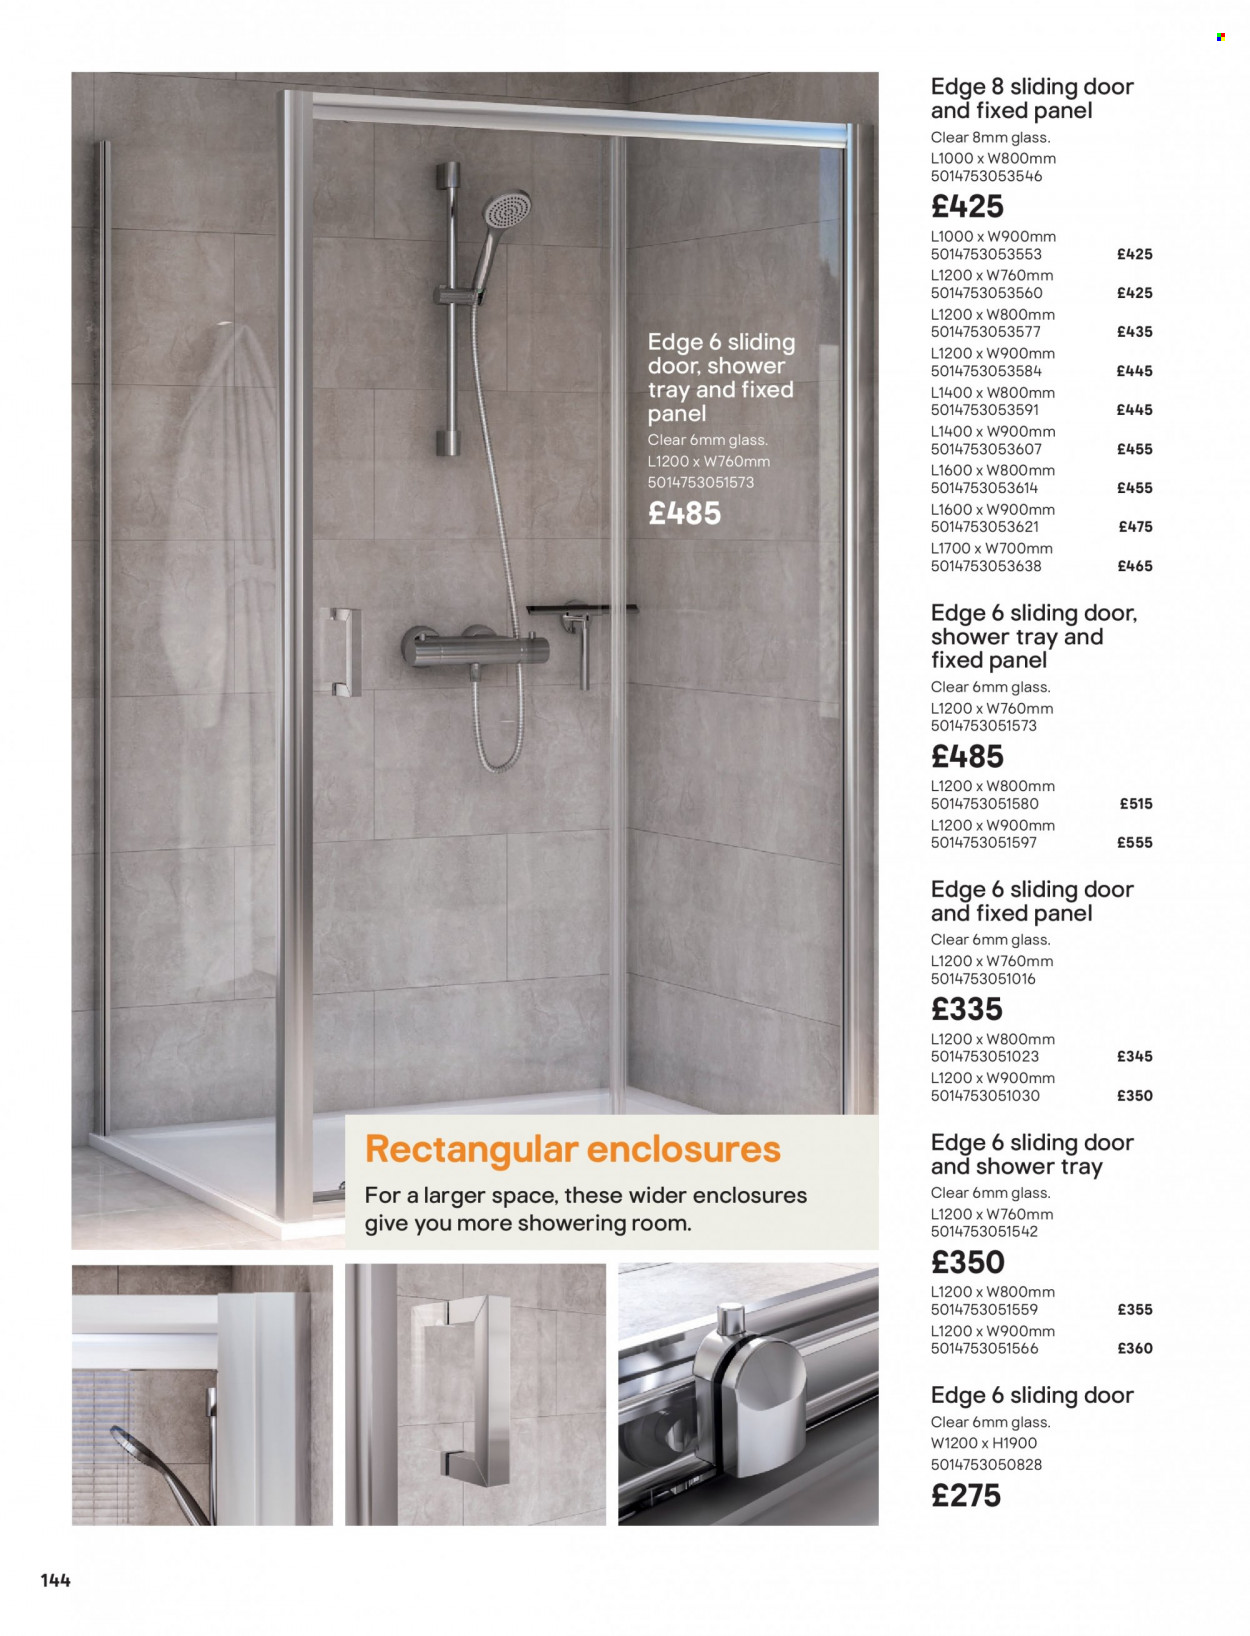 B&Q offer . Page 144.